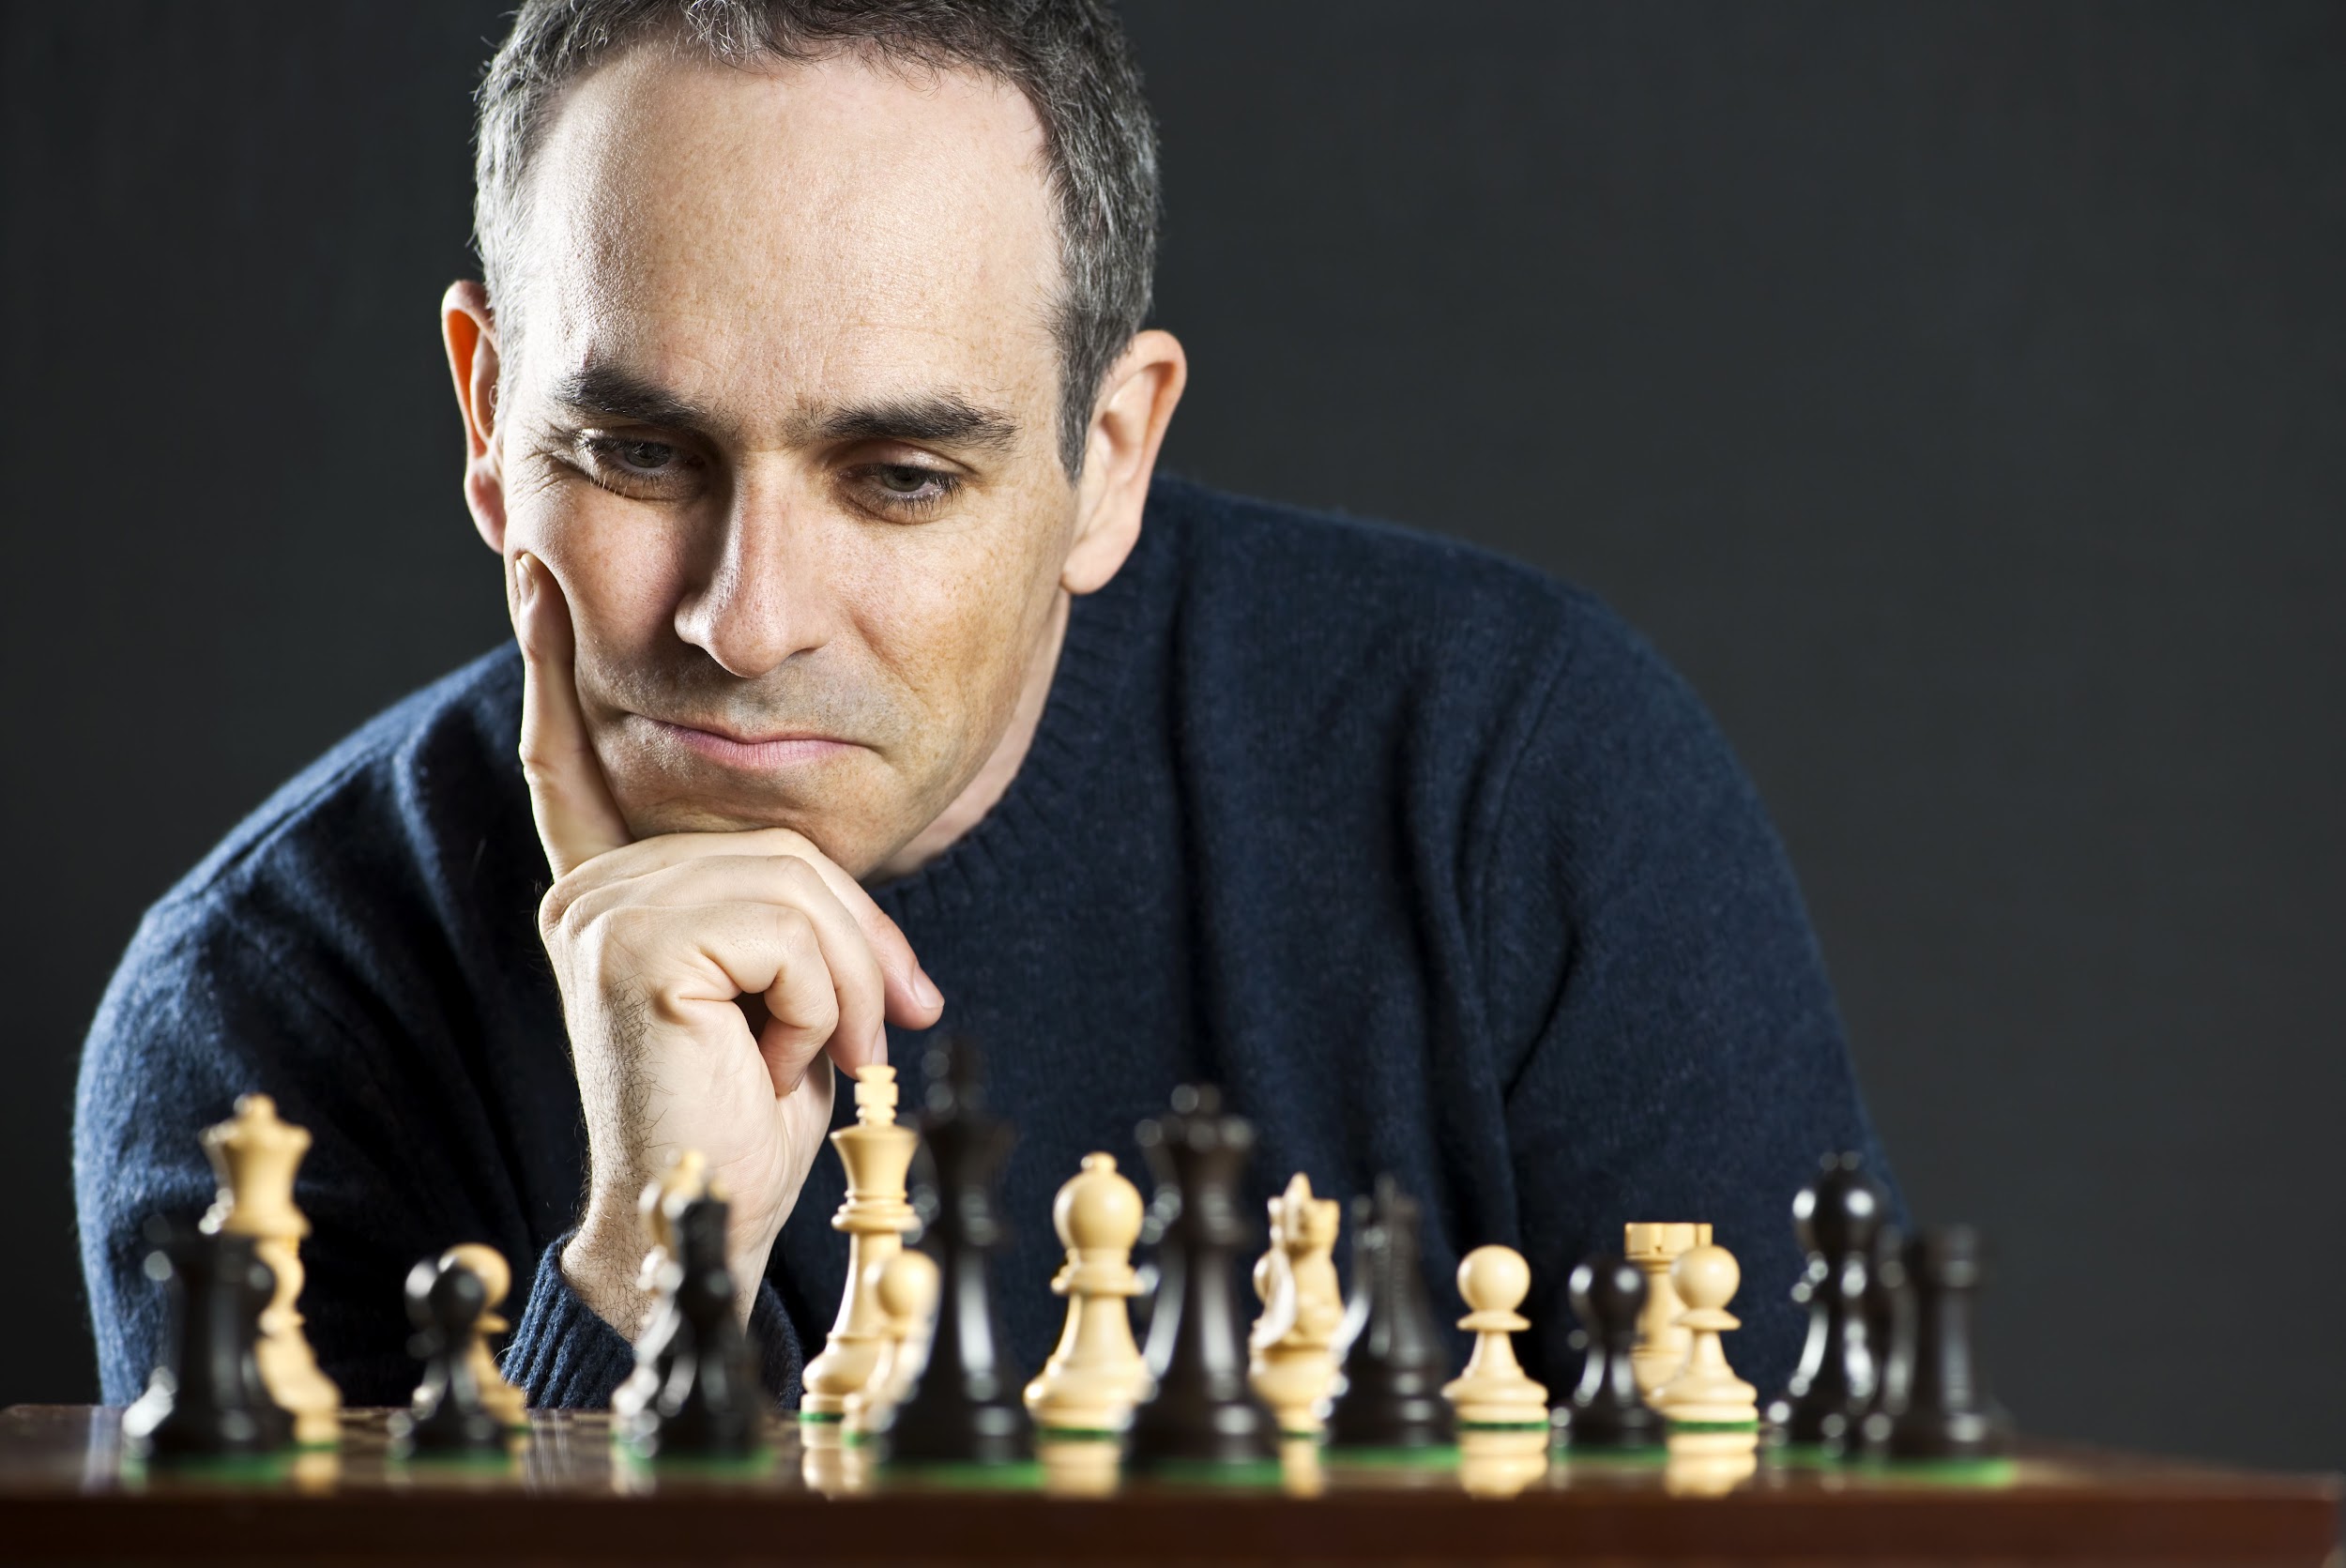 chess helps discipline and focus